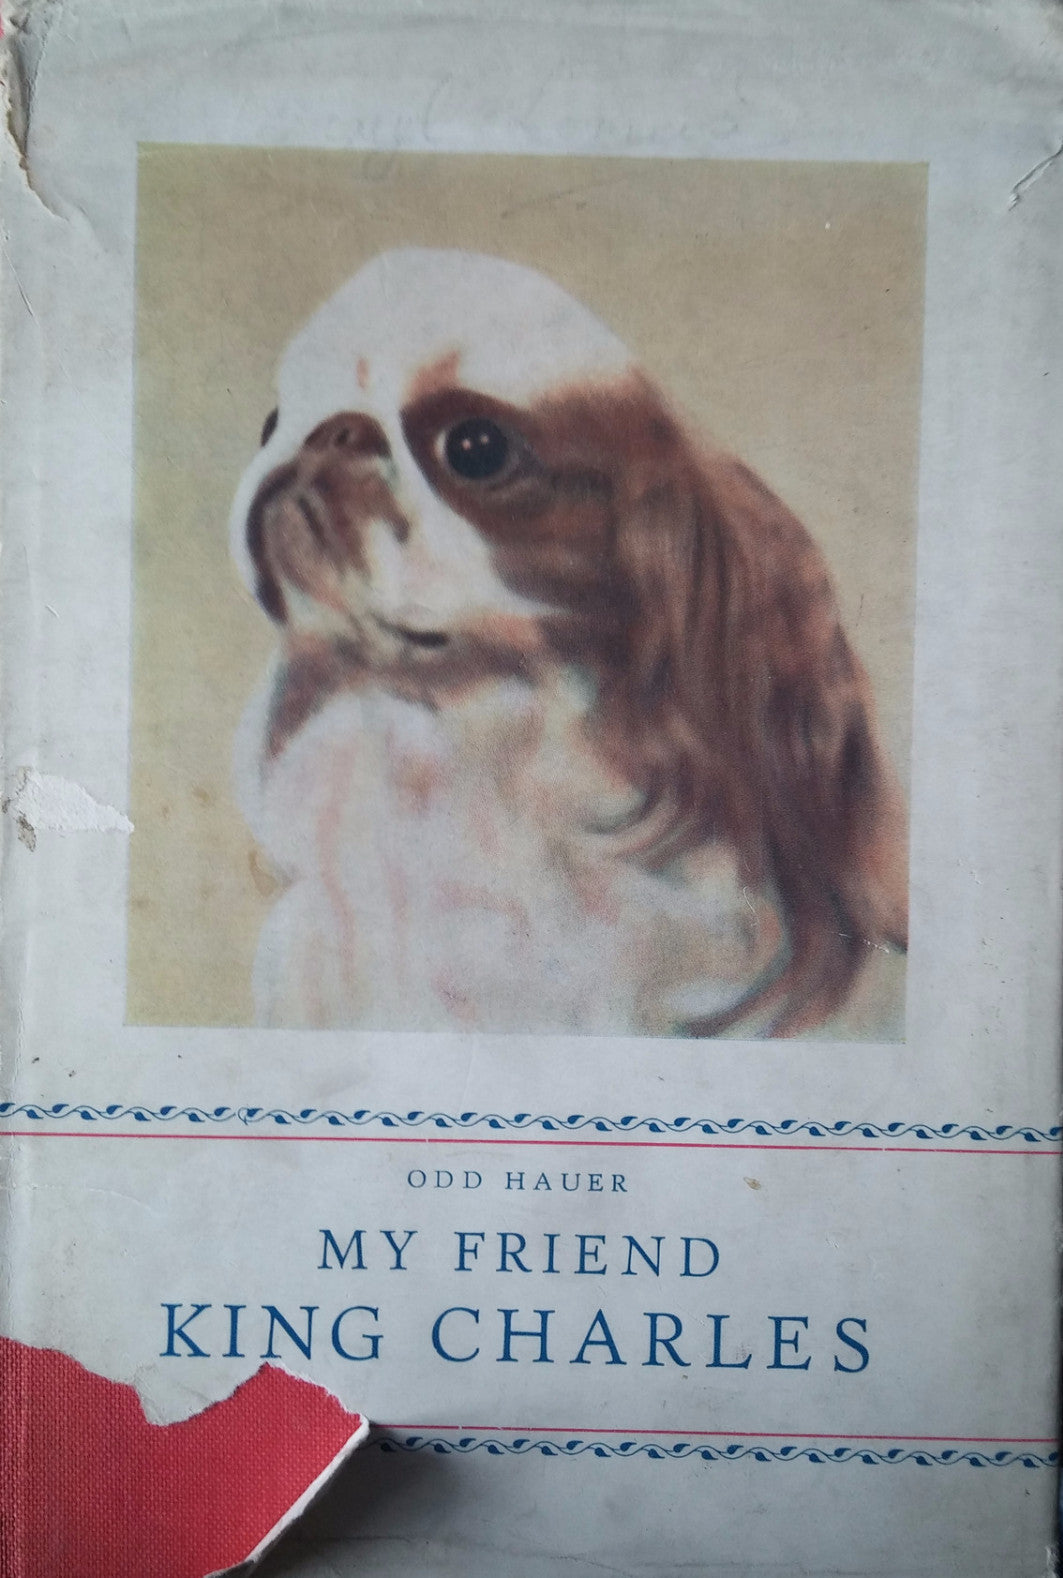 Book " my friend the King charles by Odd Hauer" English Toy Spaniel